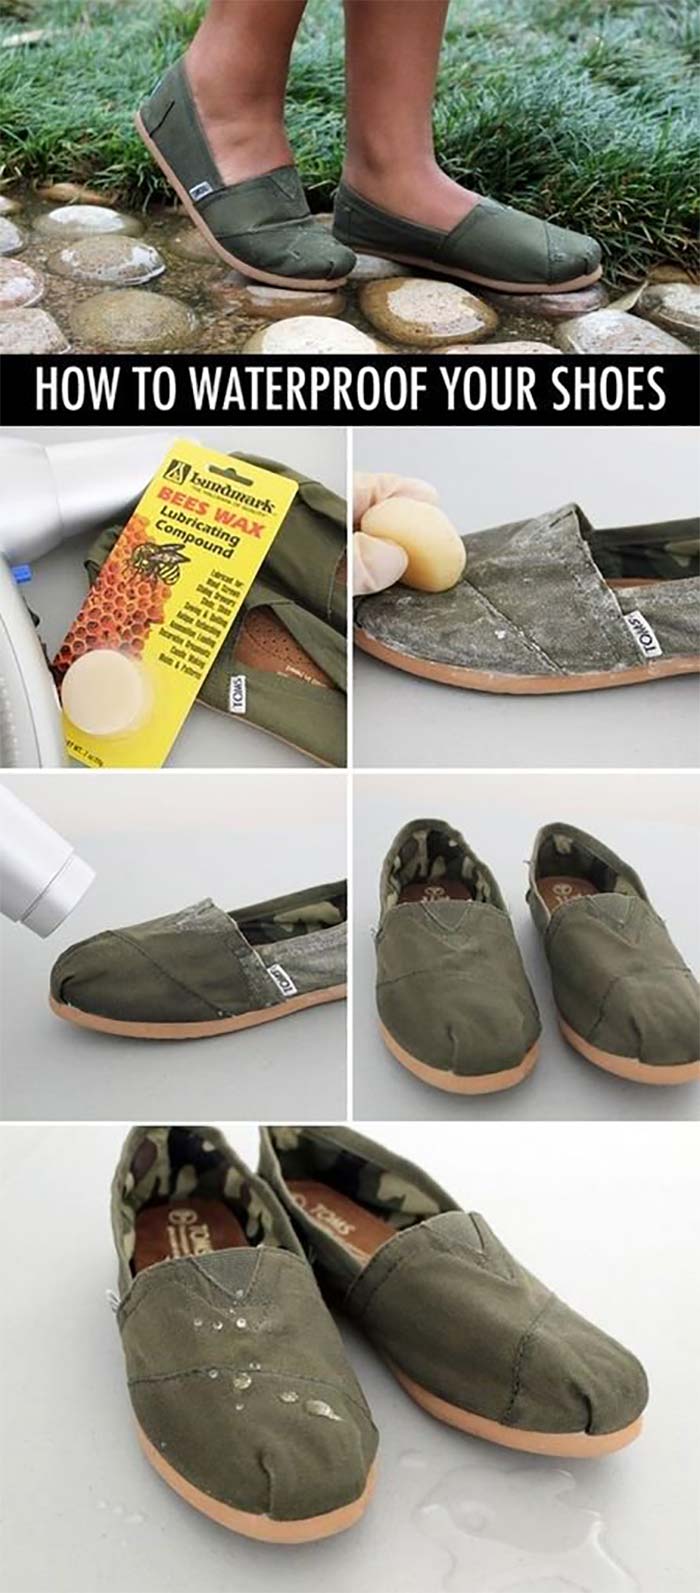 10. Apply Beeswax On Your Shoes To Waterproof Them 